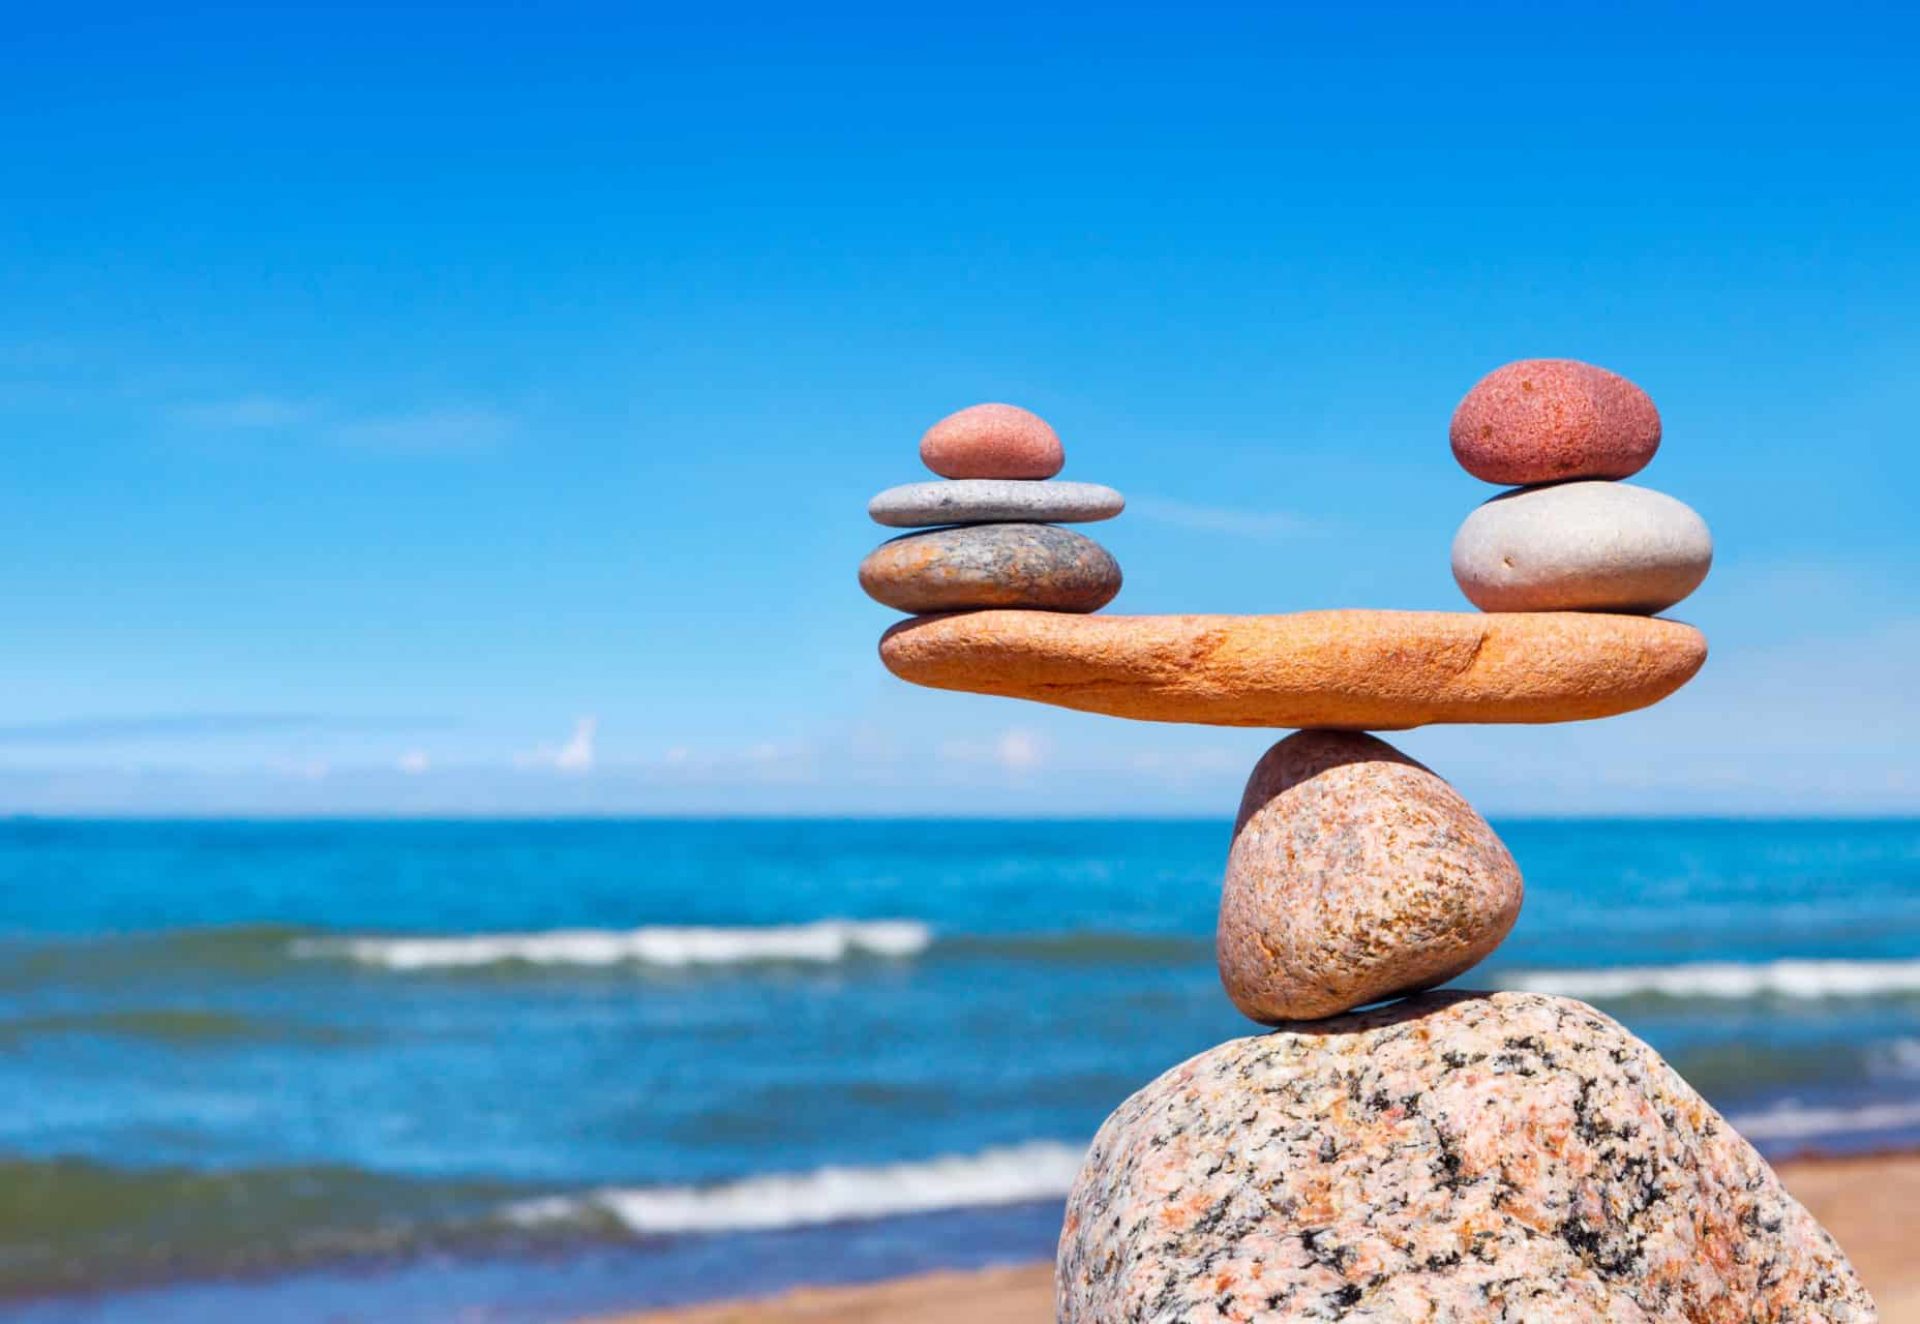 Concept,Of,Harmony,And,Balance.,Balance,Stones,Against,The,Sea.